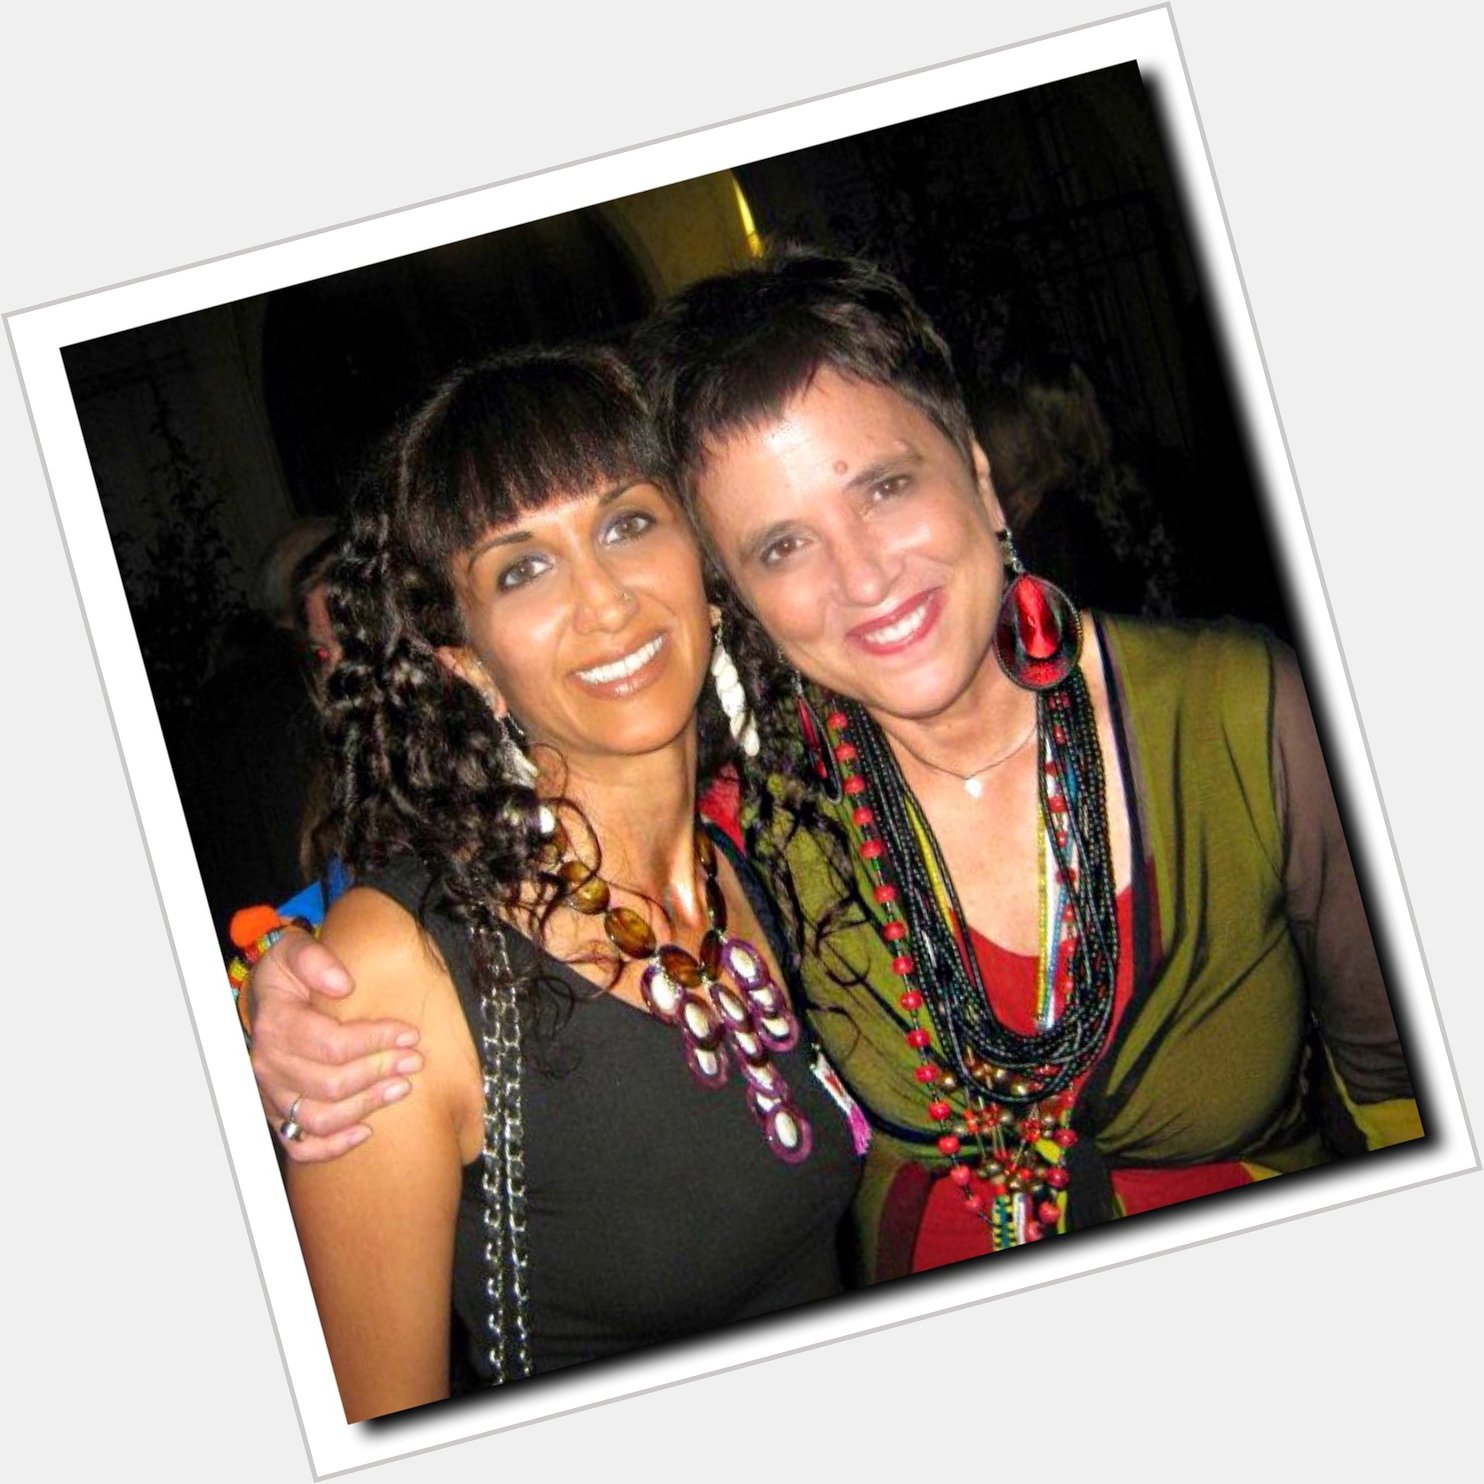 HAPPY BIRTHDAY TO MY SHERO, EVE ENSLER! I love you more than you know! 